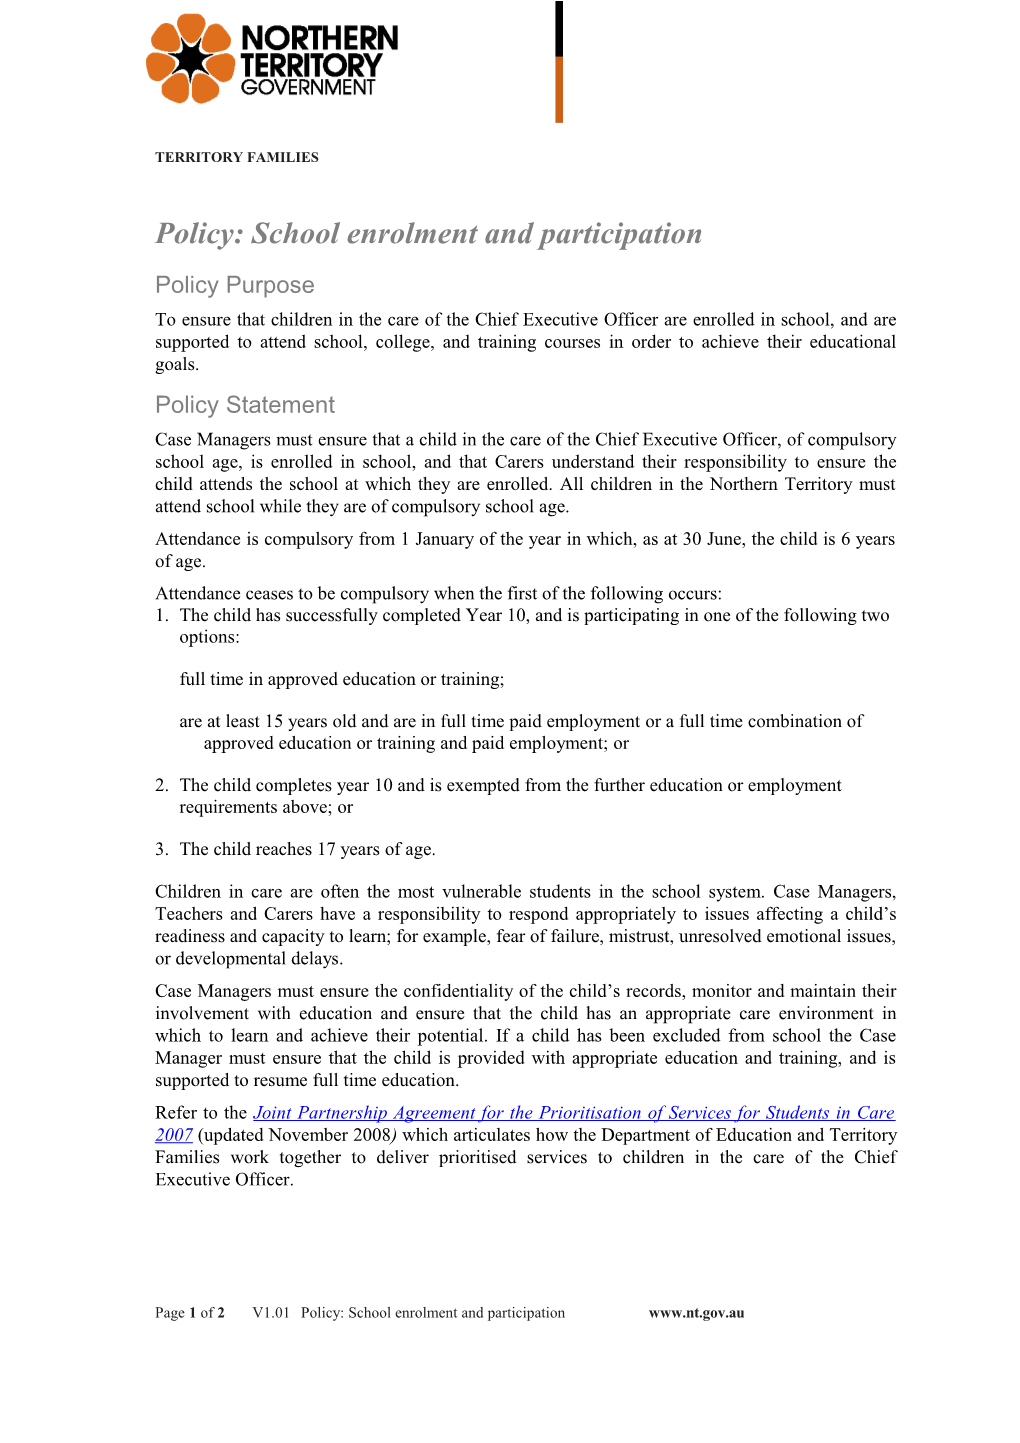 Policy: School Enrolment and Participation